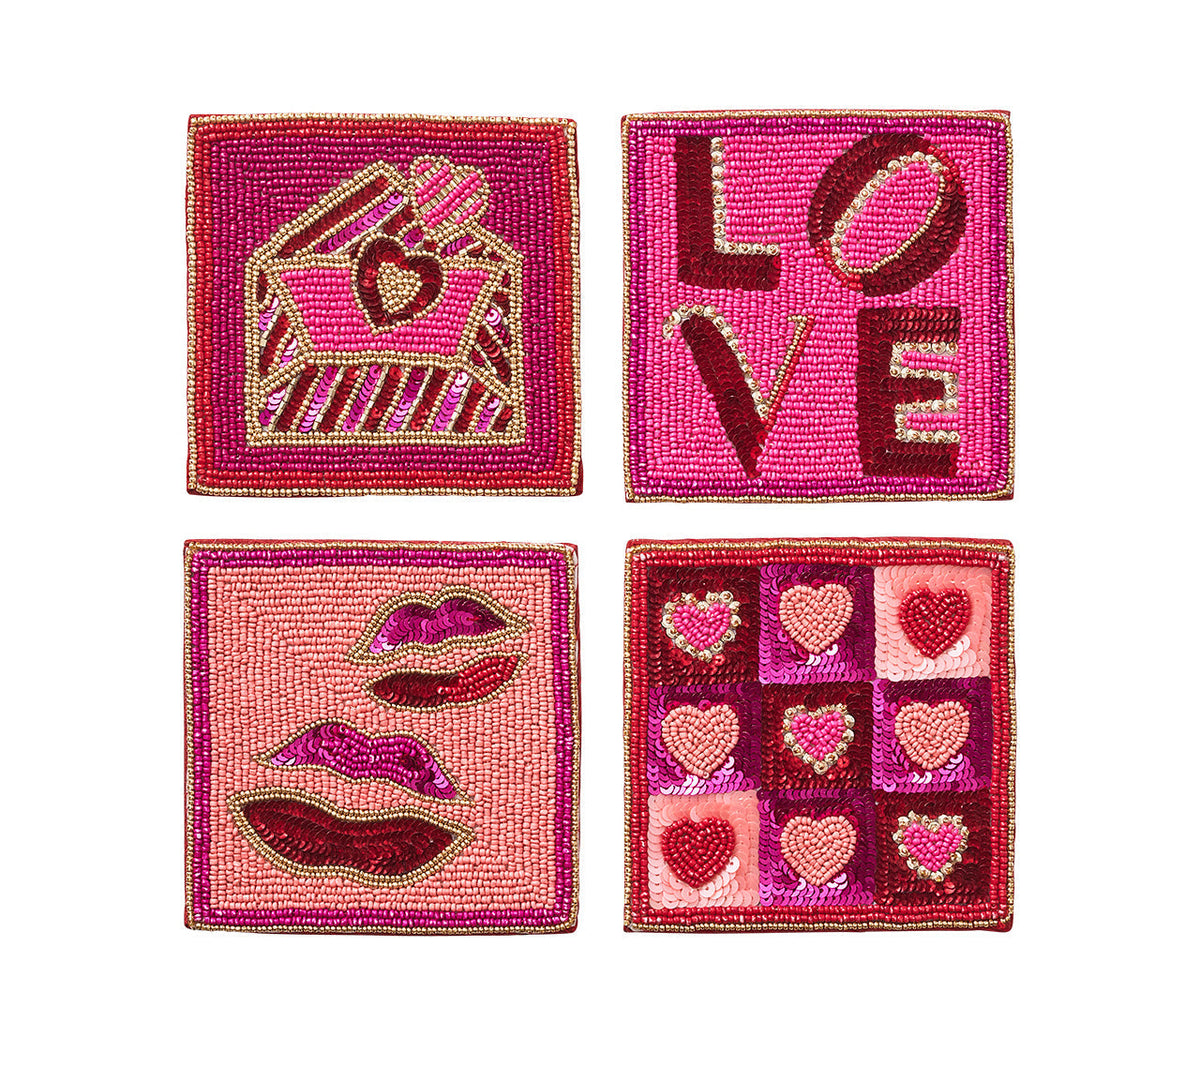 Amore Drink Coasters in Pink & Red, Set of 4 in a Gift Bag